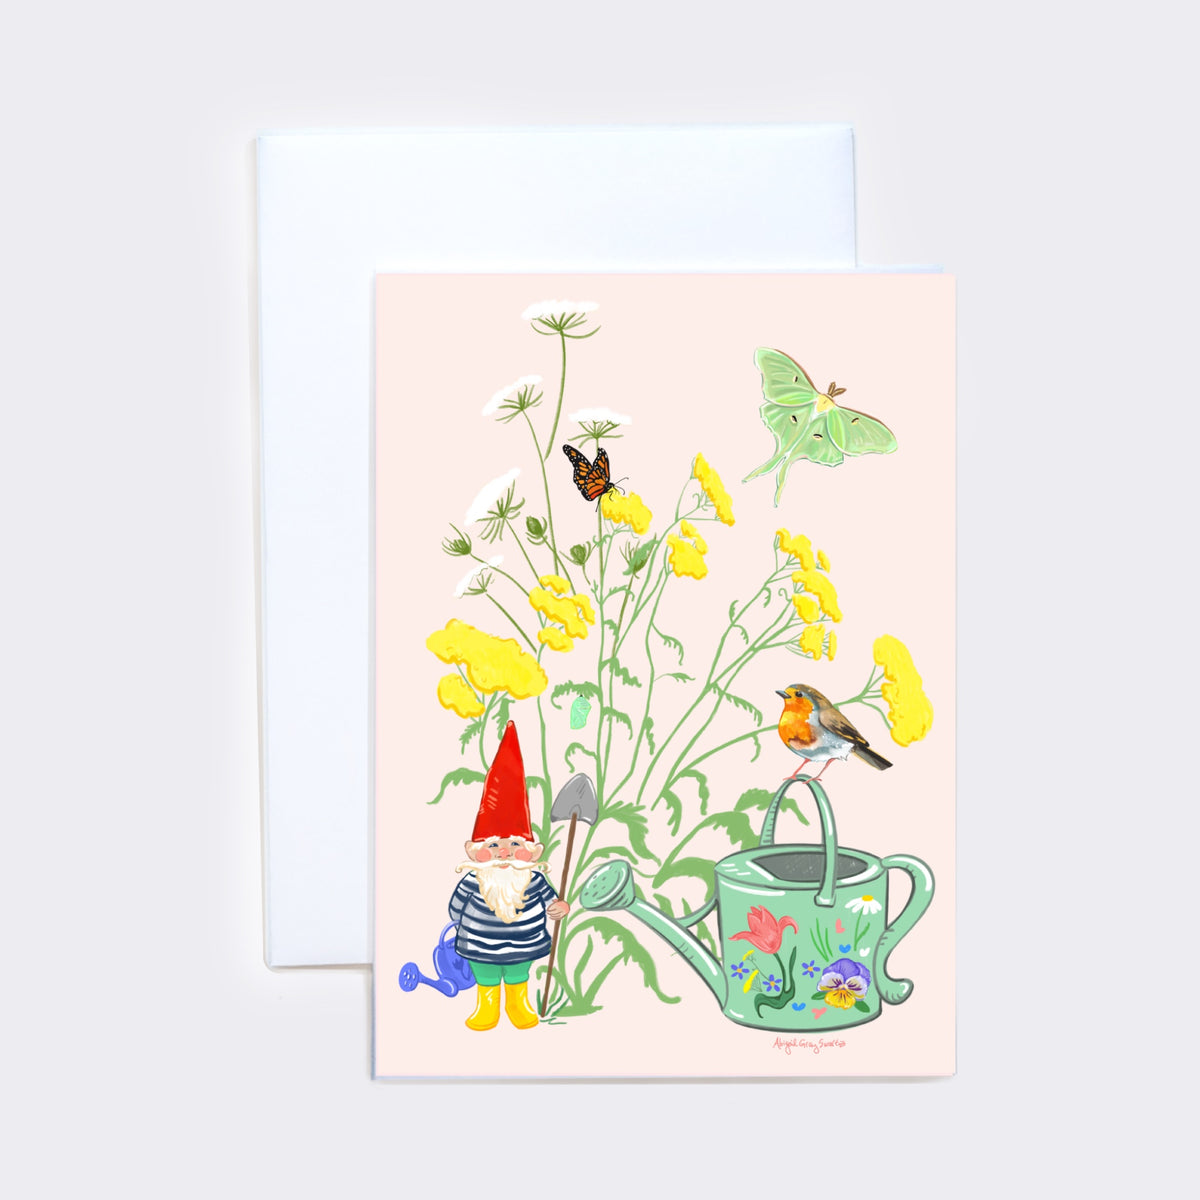 Garden gnome greeting card, complete with a floral watering can, robin, butterfly, moth and more. Made in Maine by Abigail Gray Swartz